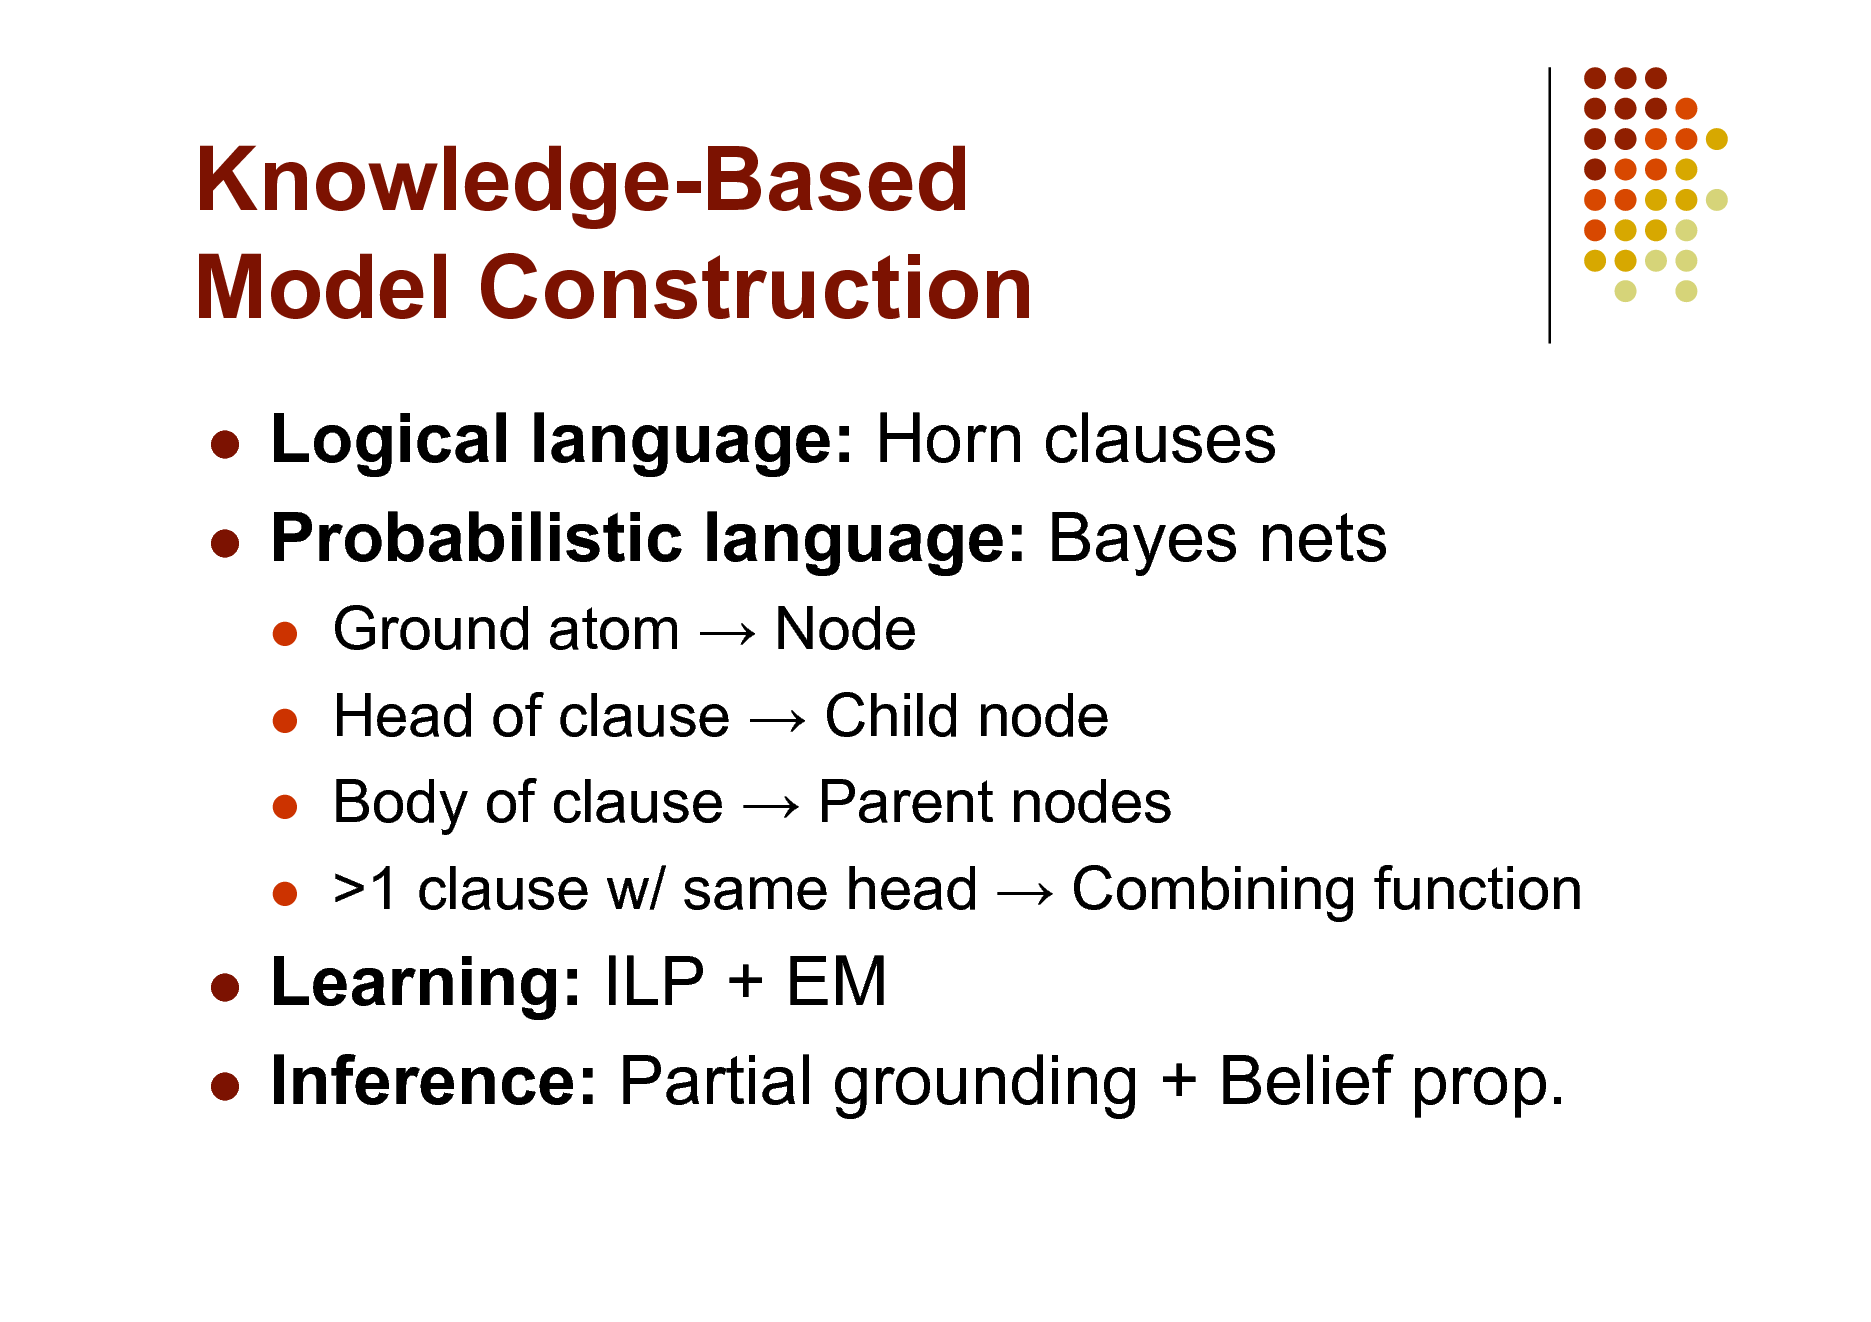 Slide: Knowledge-Based Model Construction
Logical language: Horn clauses  Probabilistic language: Bayes nets

   

Ground atom  Node Head of clause  Child node Body of clause  Parent nodes >1 clause w/ same head  Combining function

Learning: ILP + EM  Inference: Partial grounding + Belief prop.


